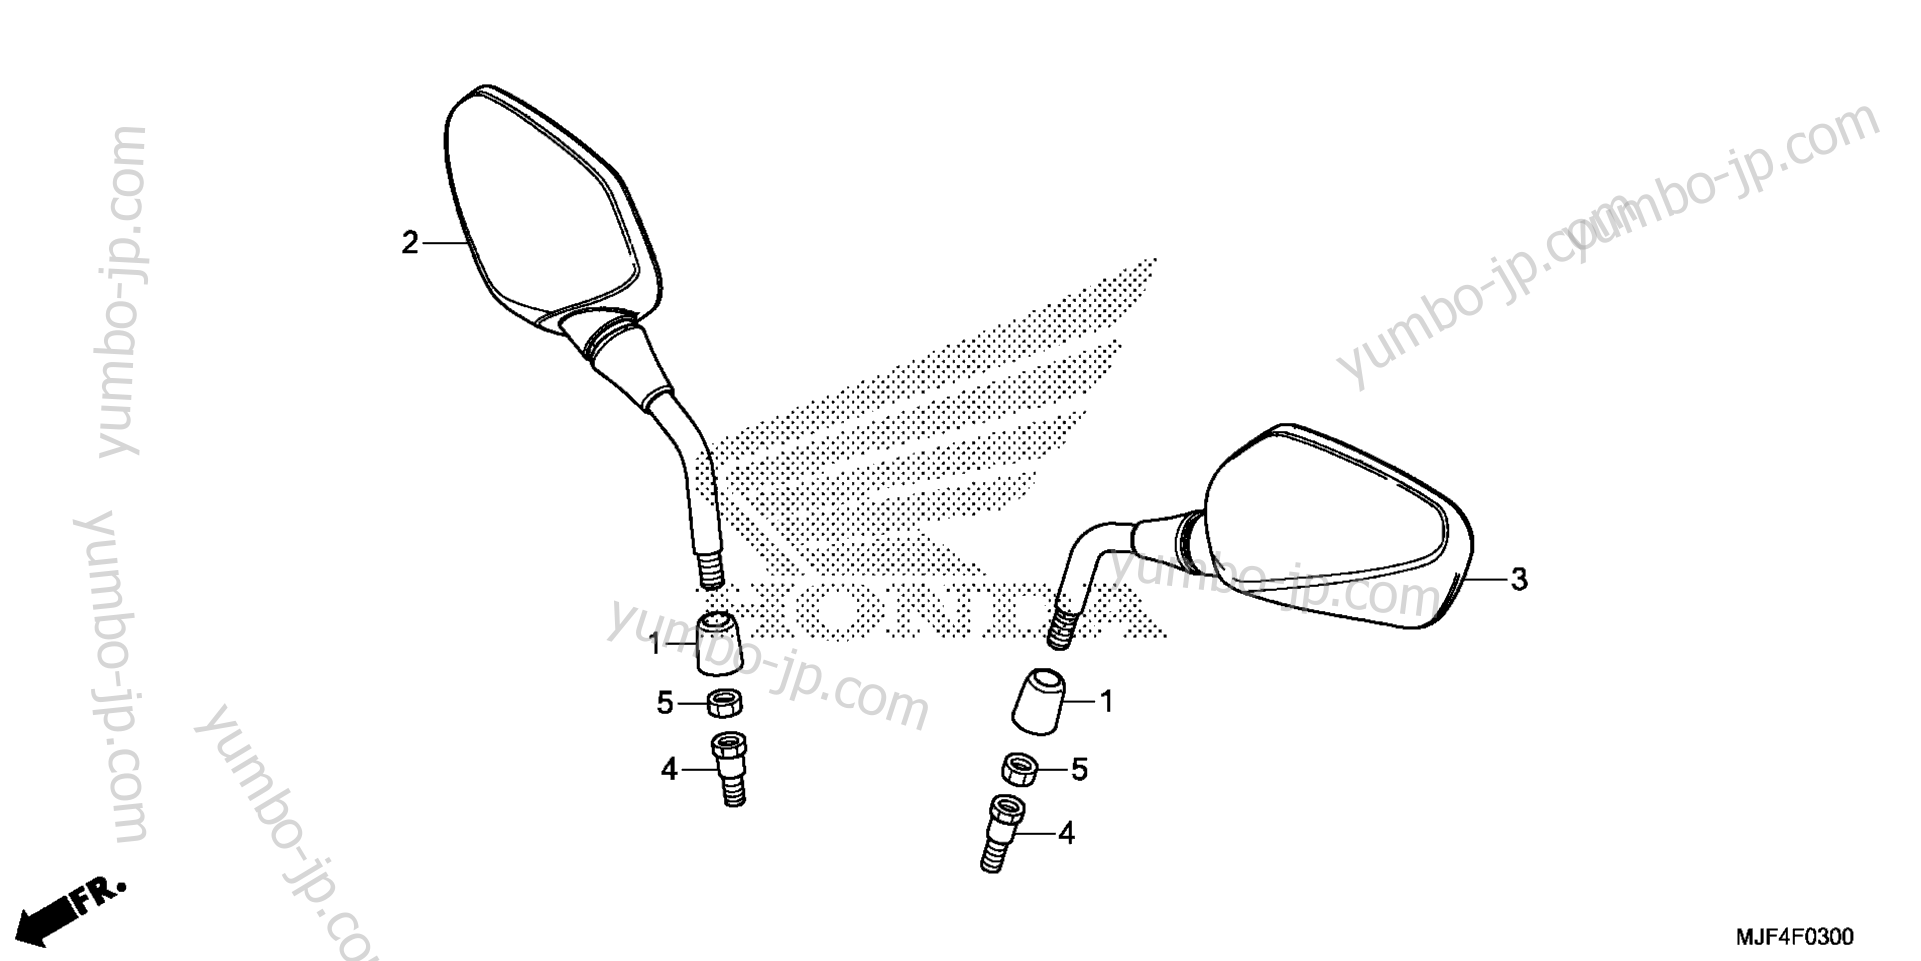 MIRROR for motorcycles HONDA CTX700ND AC 2014 year